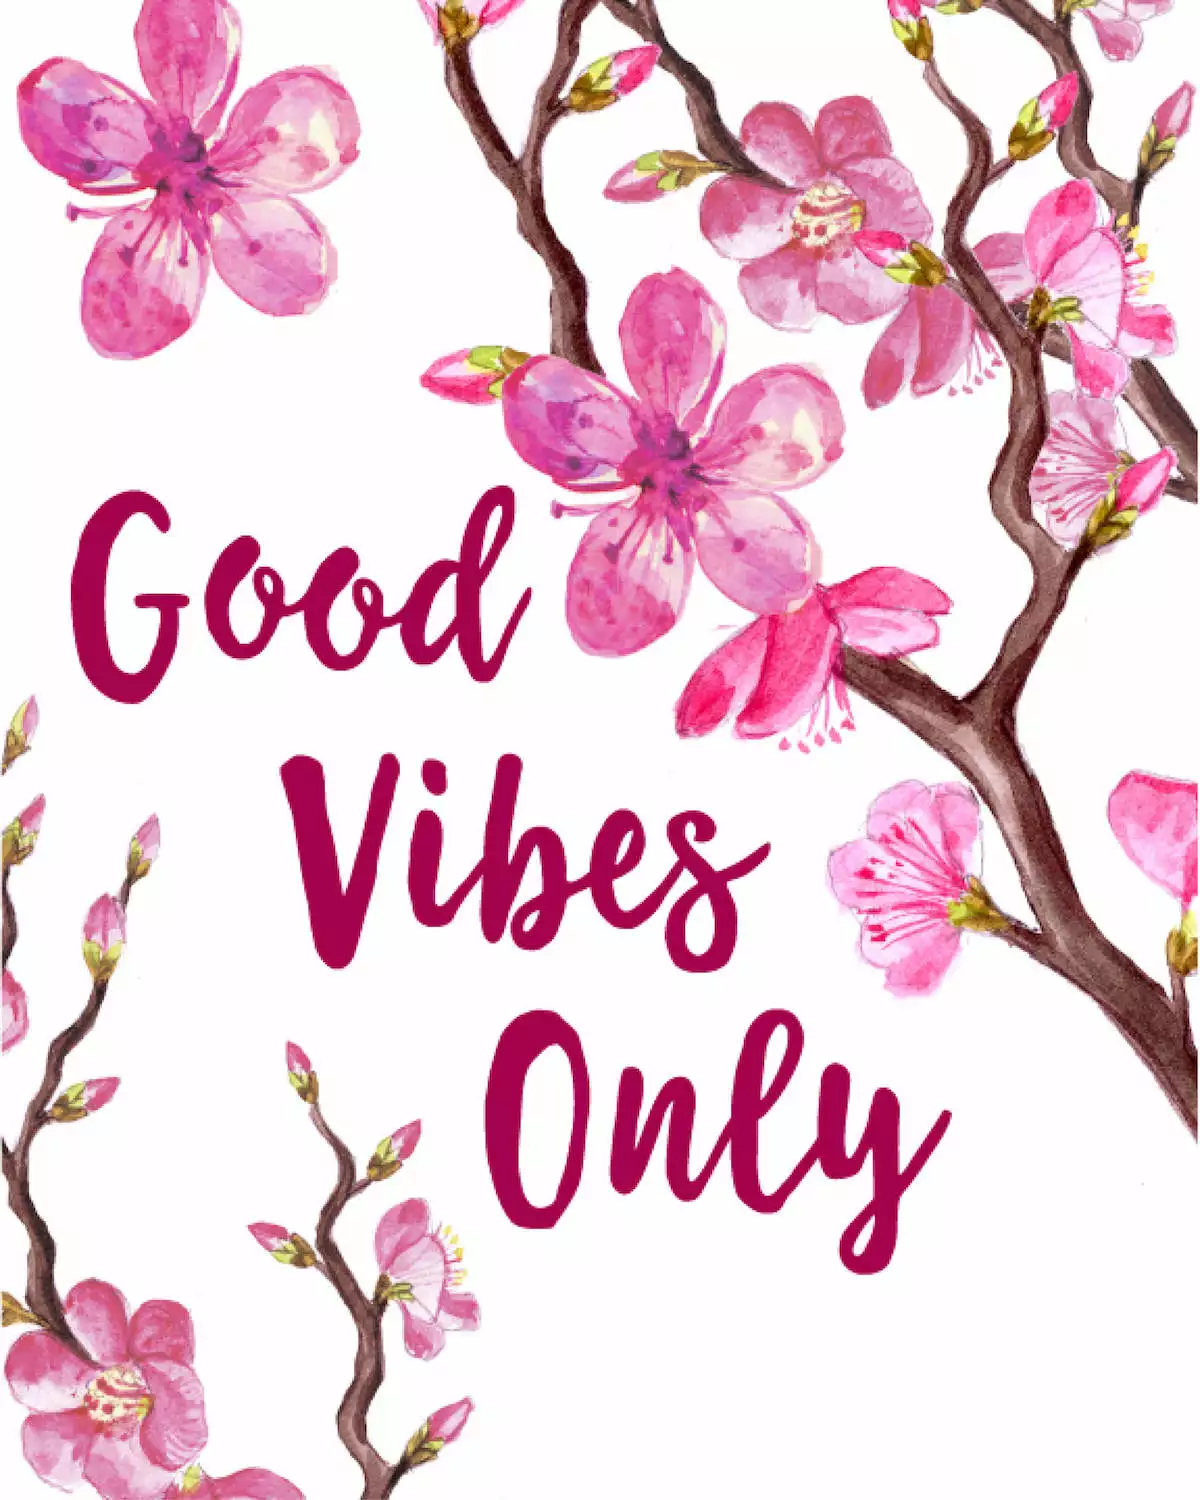 The words “Good Vibes Only” with pink flowers